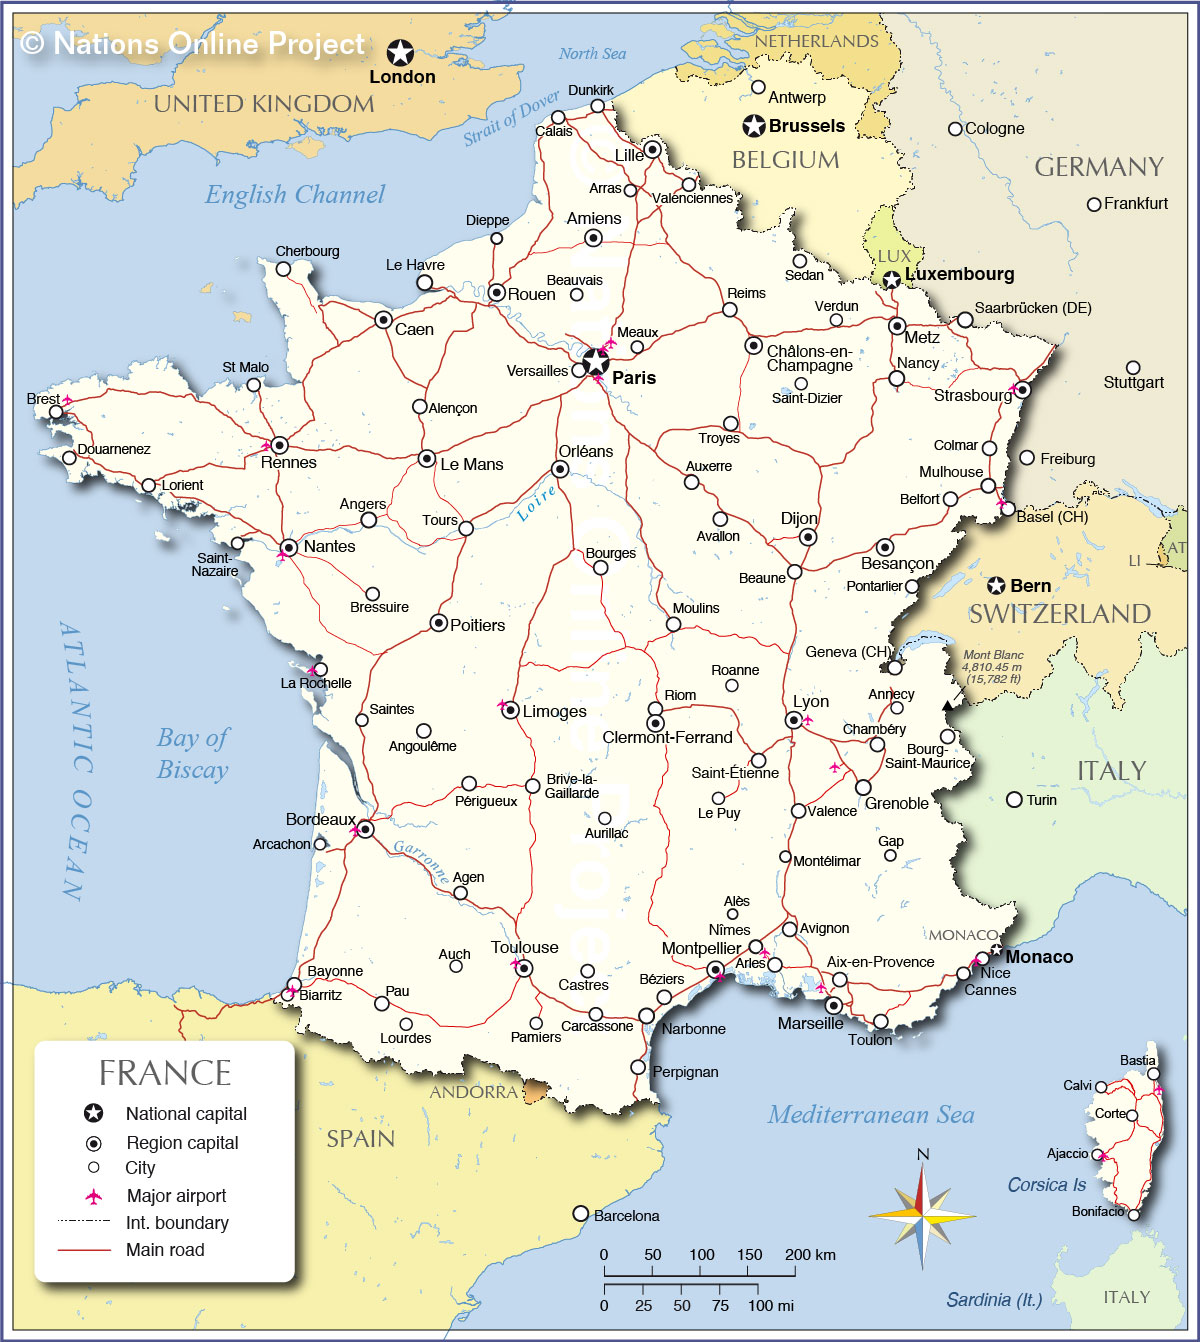 France: The Perfume Capital Of The World